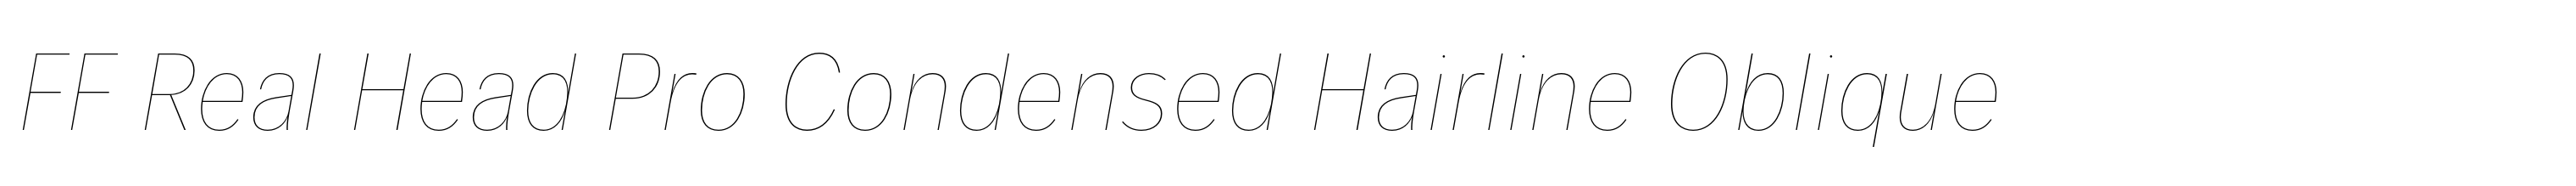 FF Real Head Pro Condensed Hairline Oblique